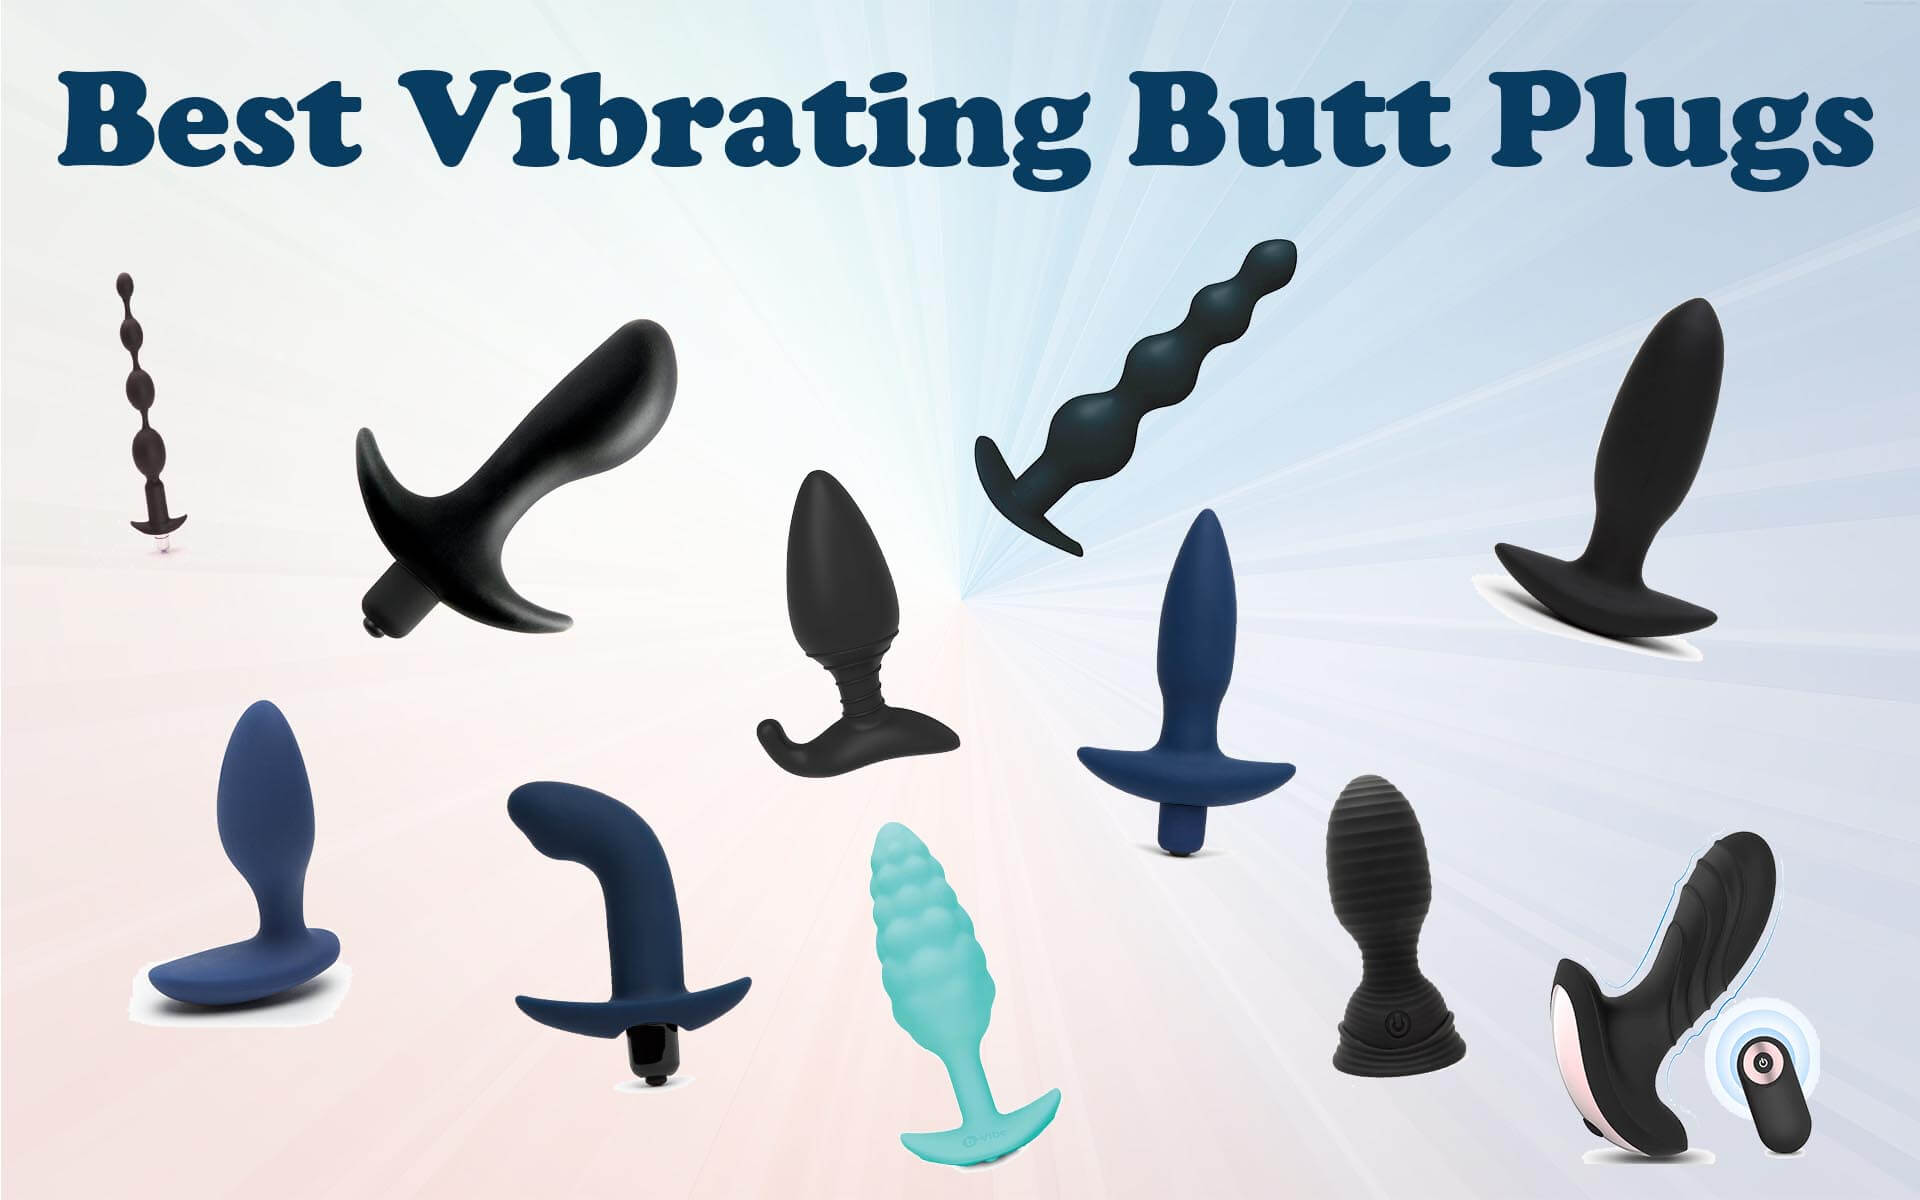 The 11 Best Vibrating Butt Plugs for Anal Play